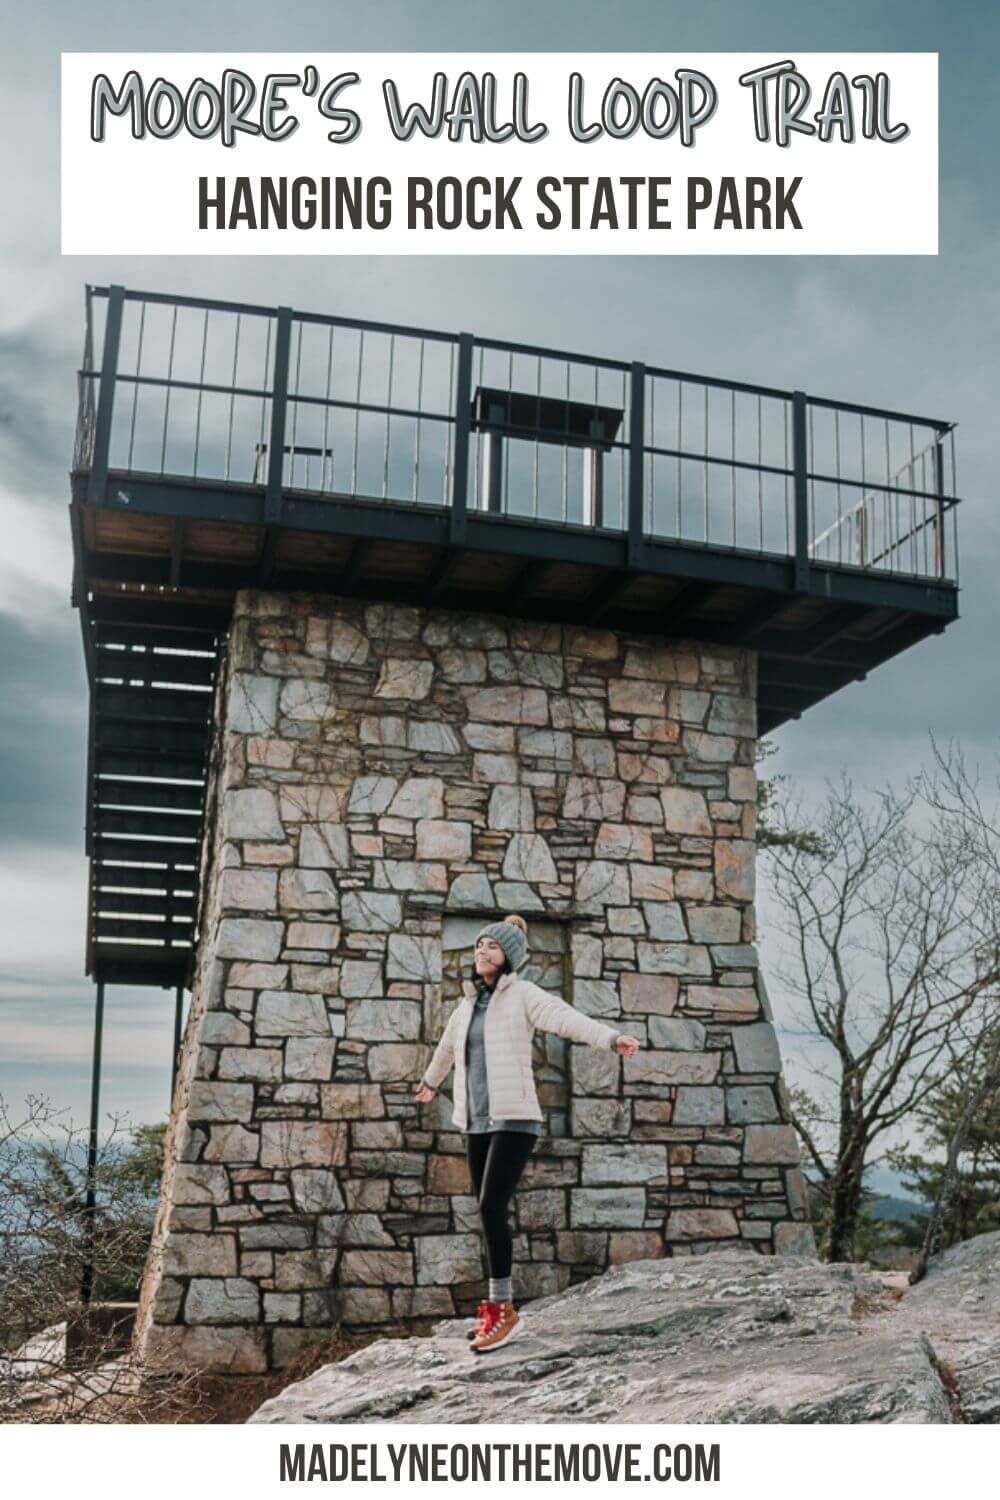 Moore's Wall Lookout Tower at Hanging Rock State Park